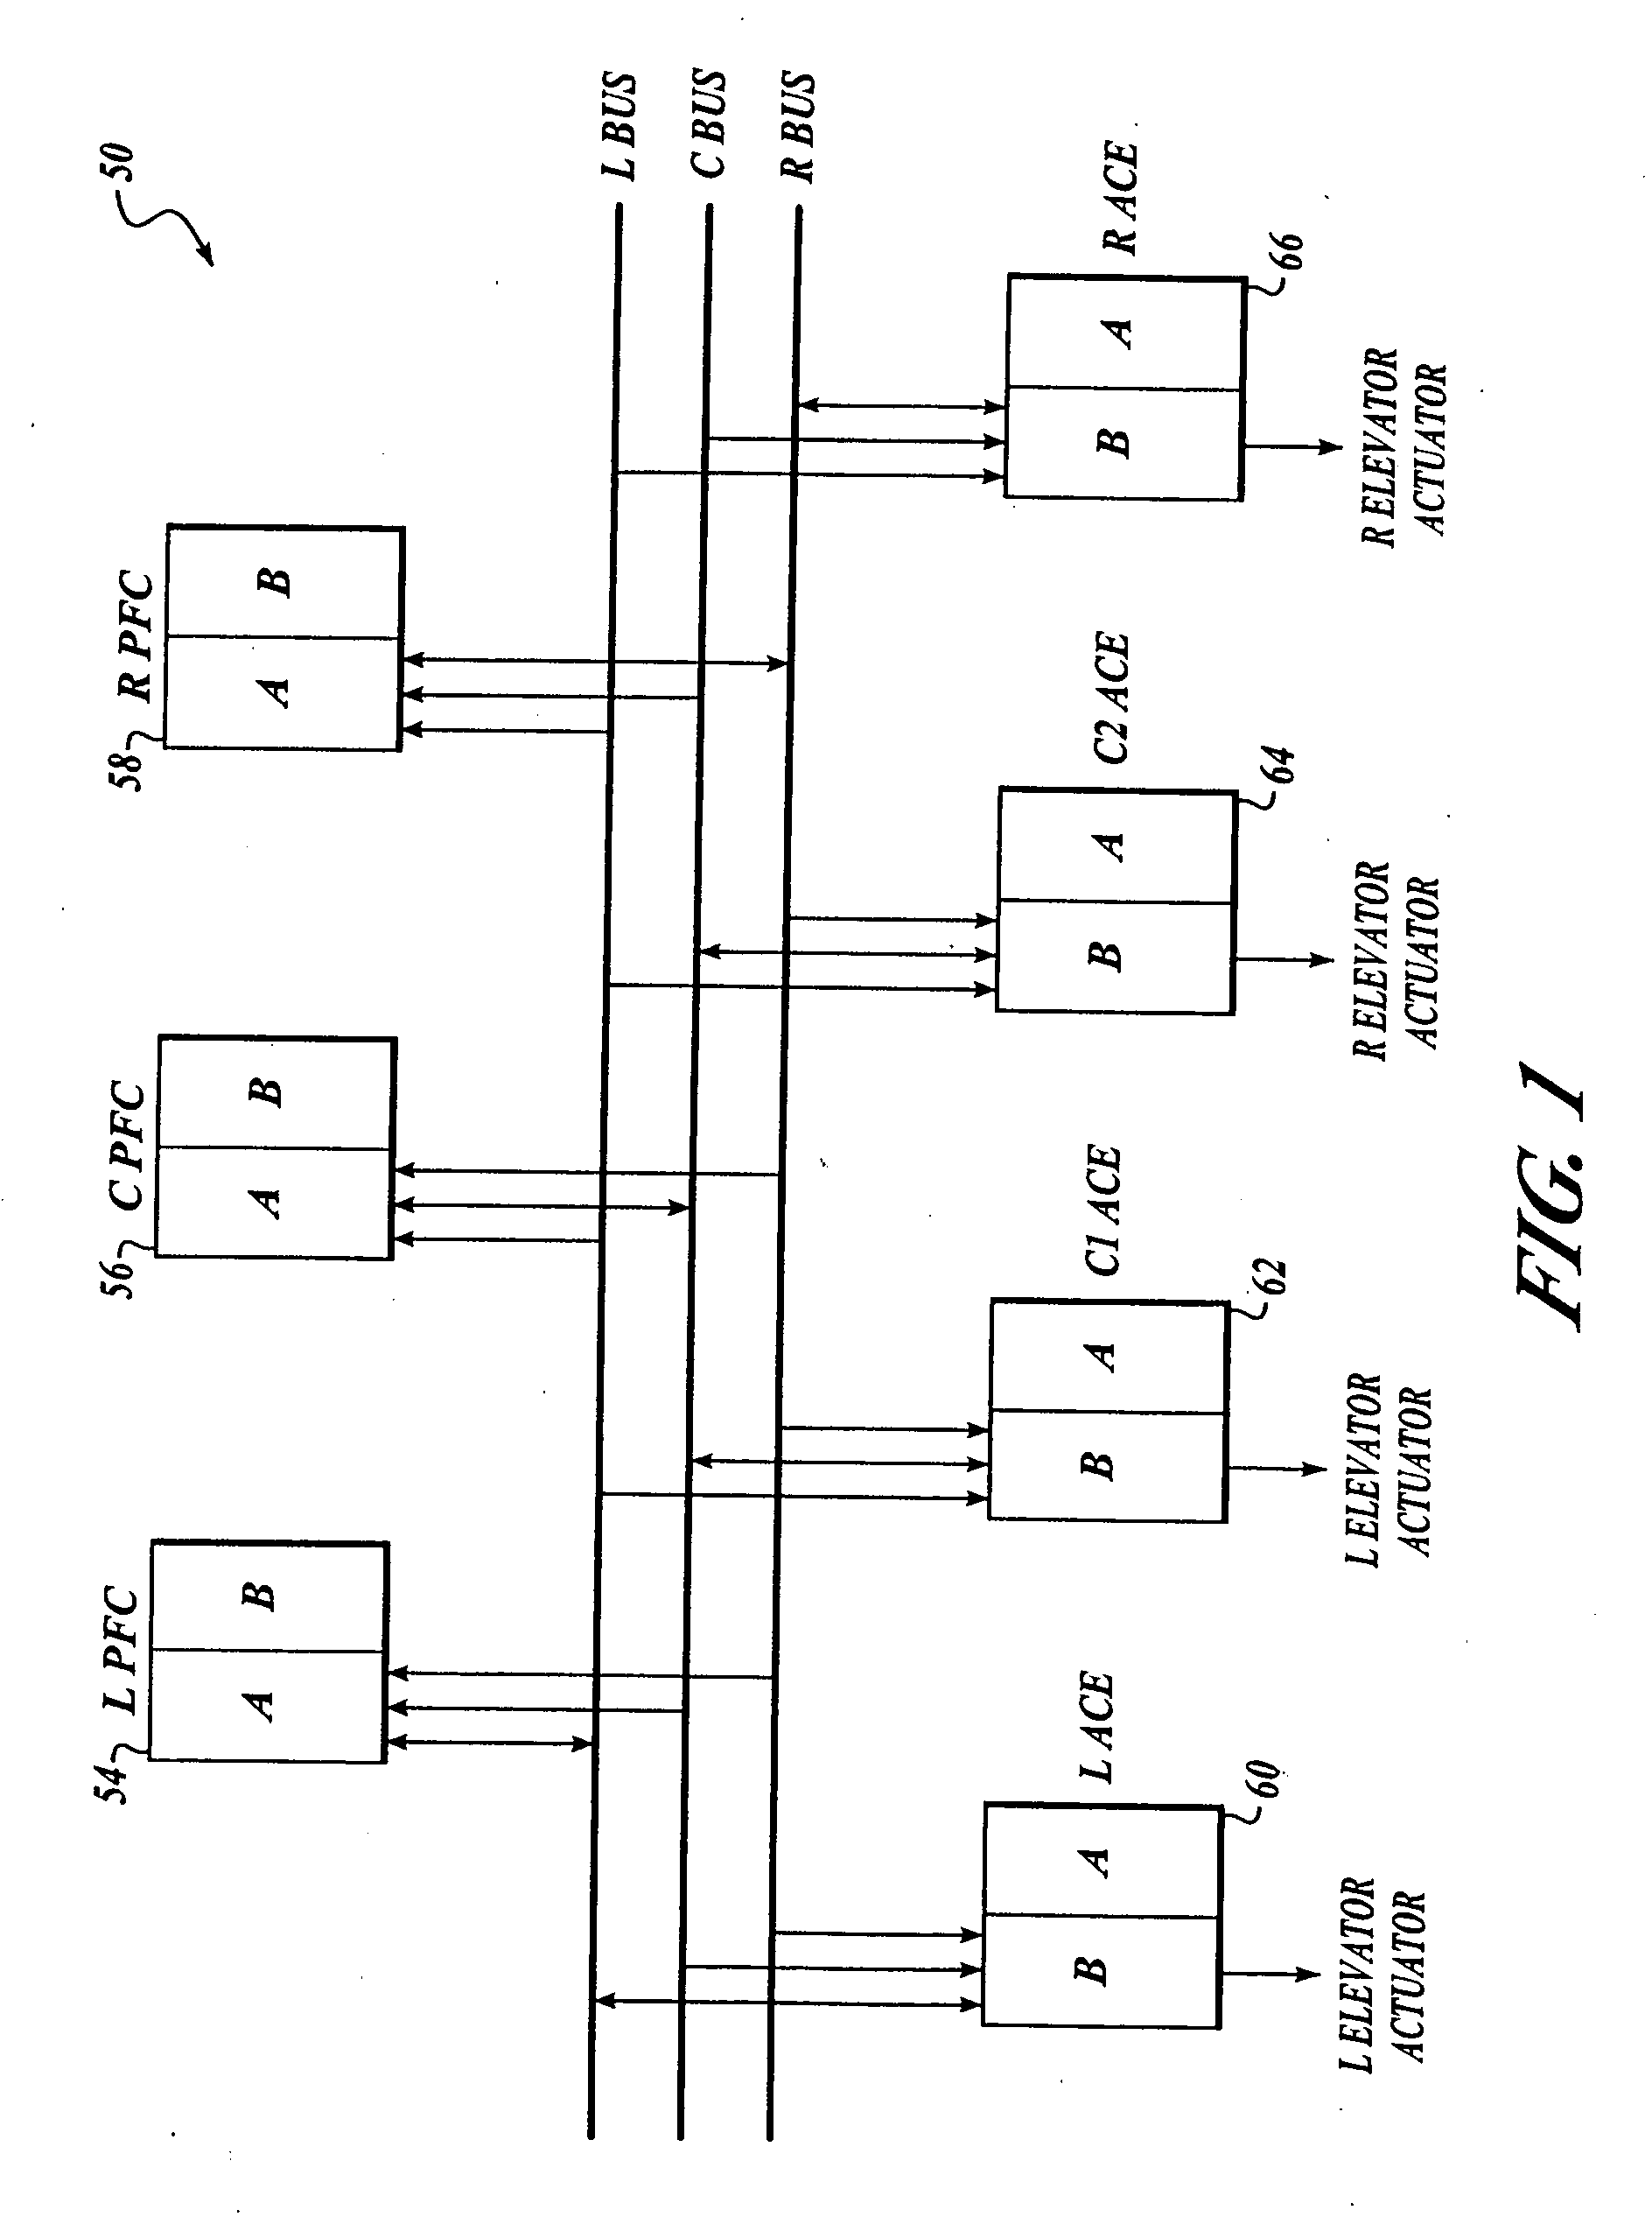 Method and apparatus for obtaining high integrity and availability in multi-channel systems